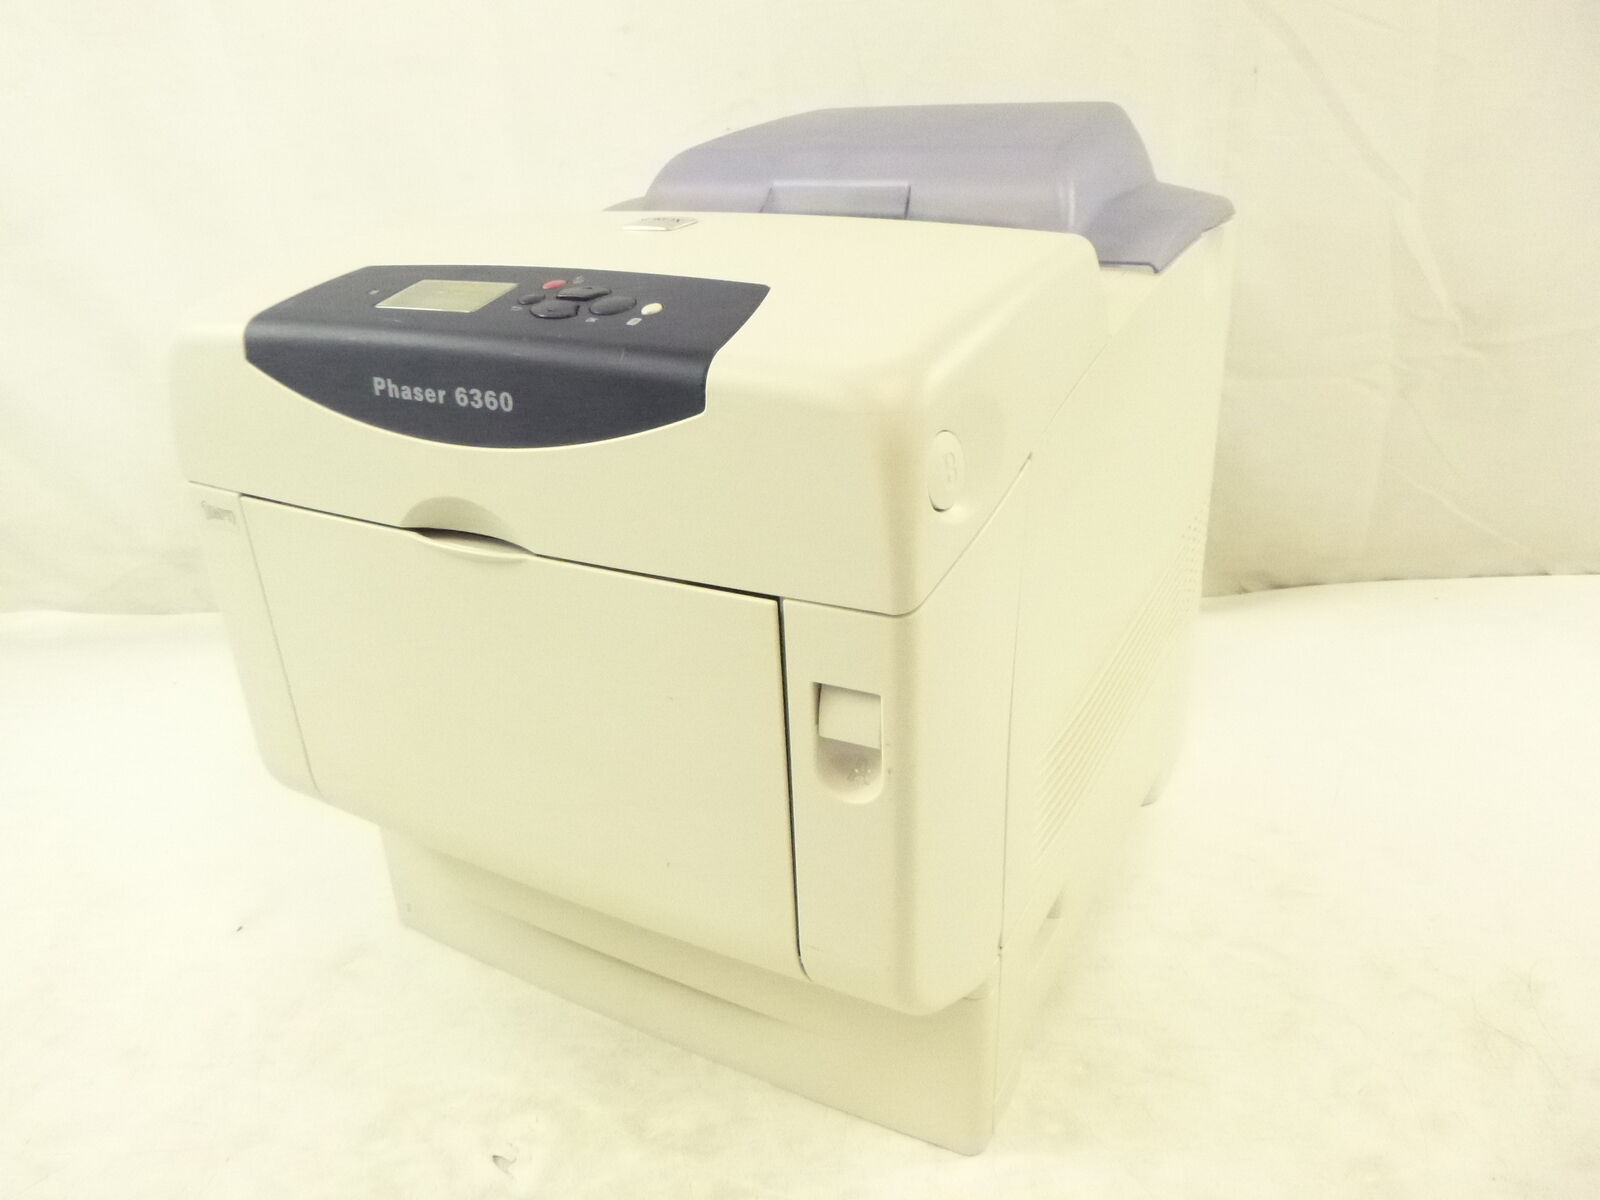 Pre-Owned Xerox Phaser 6360DN Color Laser Printer Very Low Page Count cc-13197